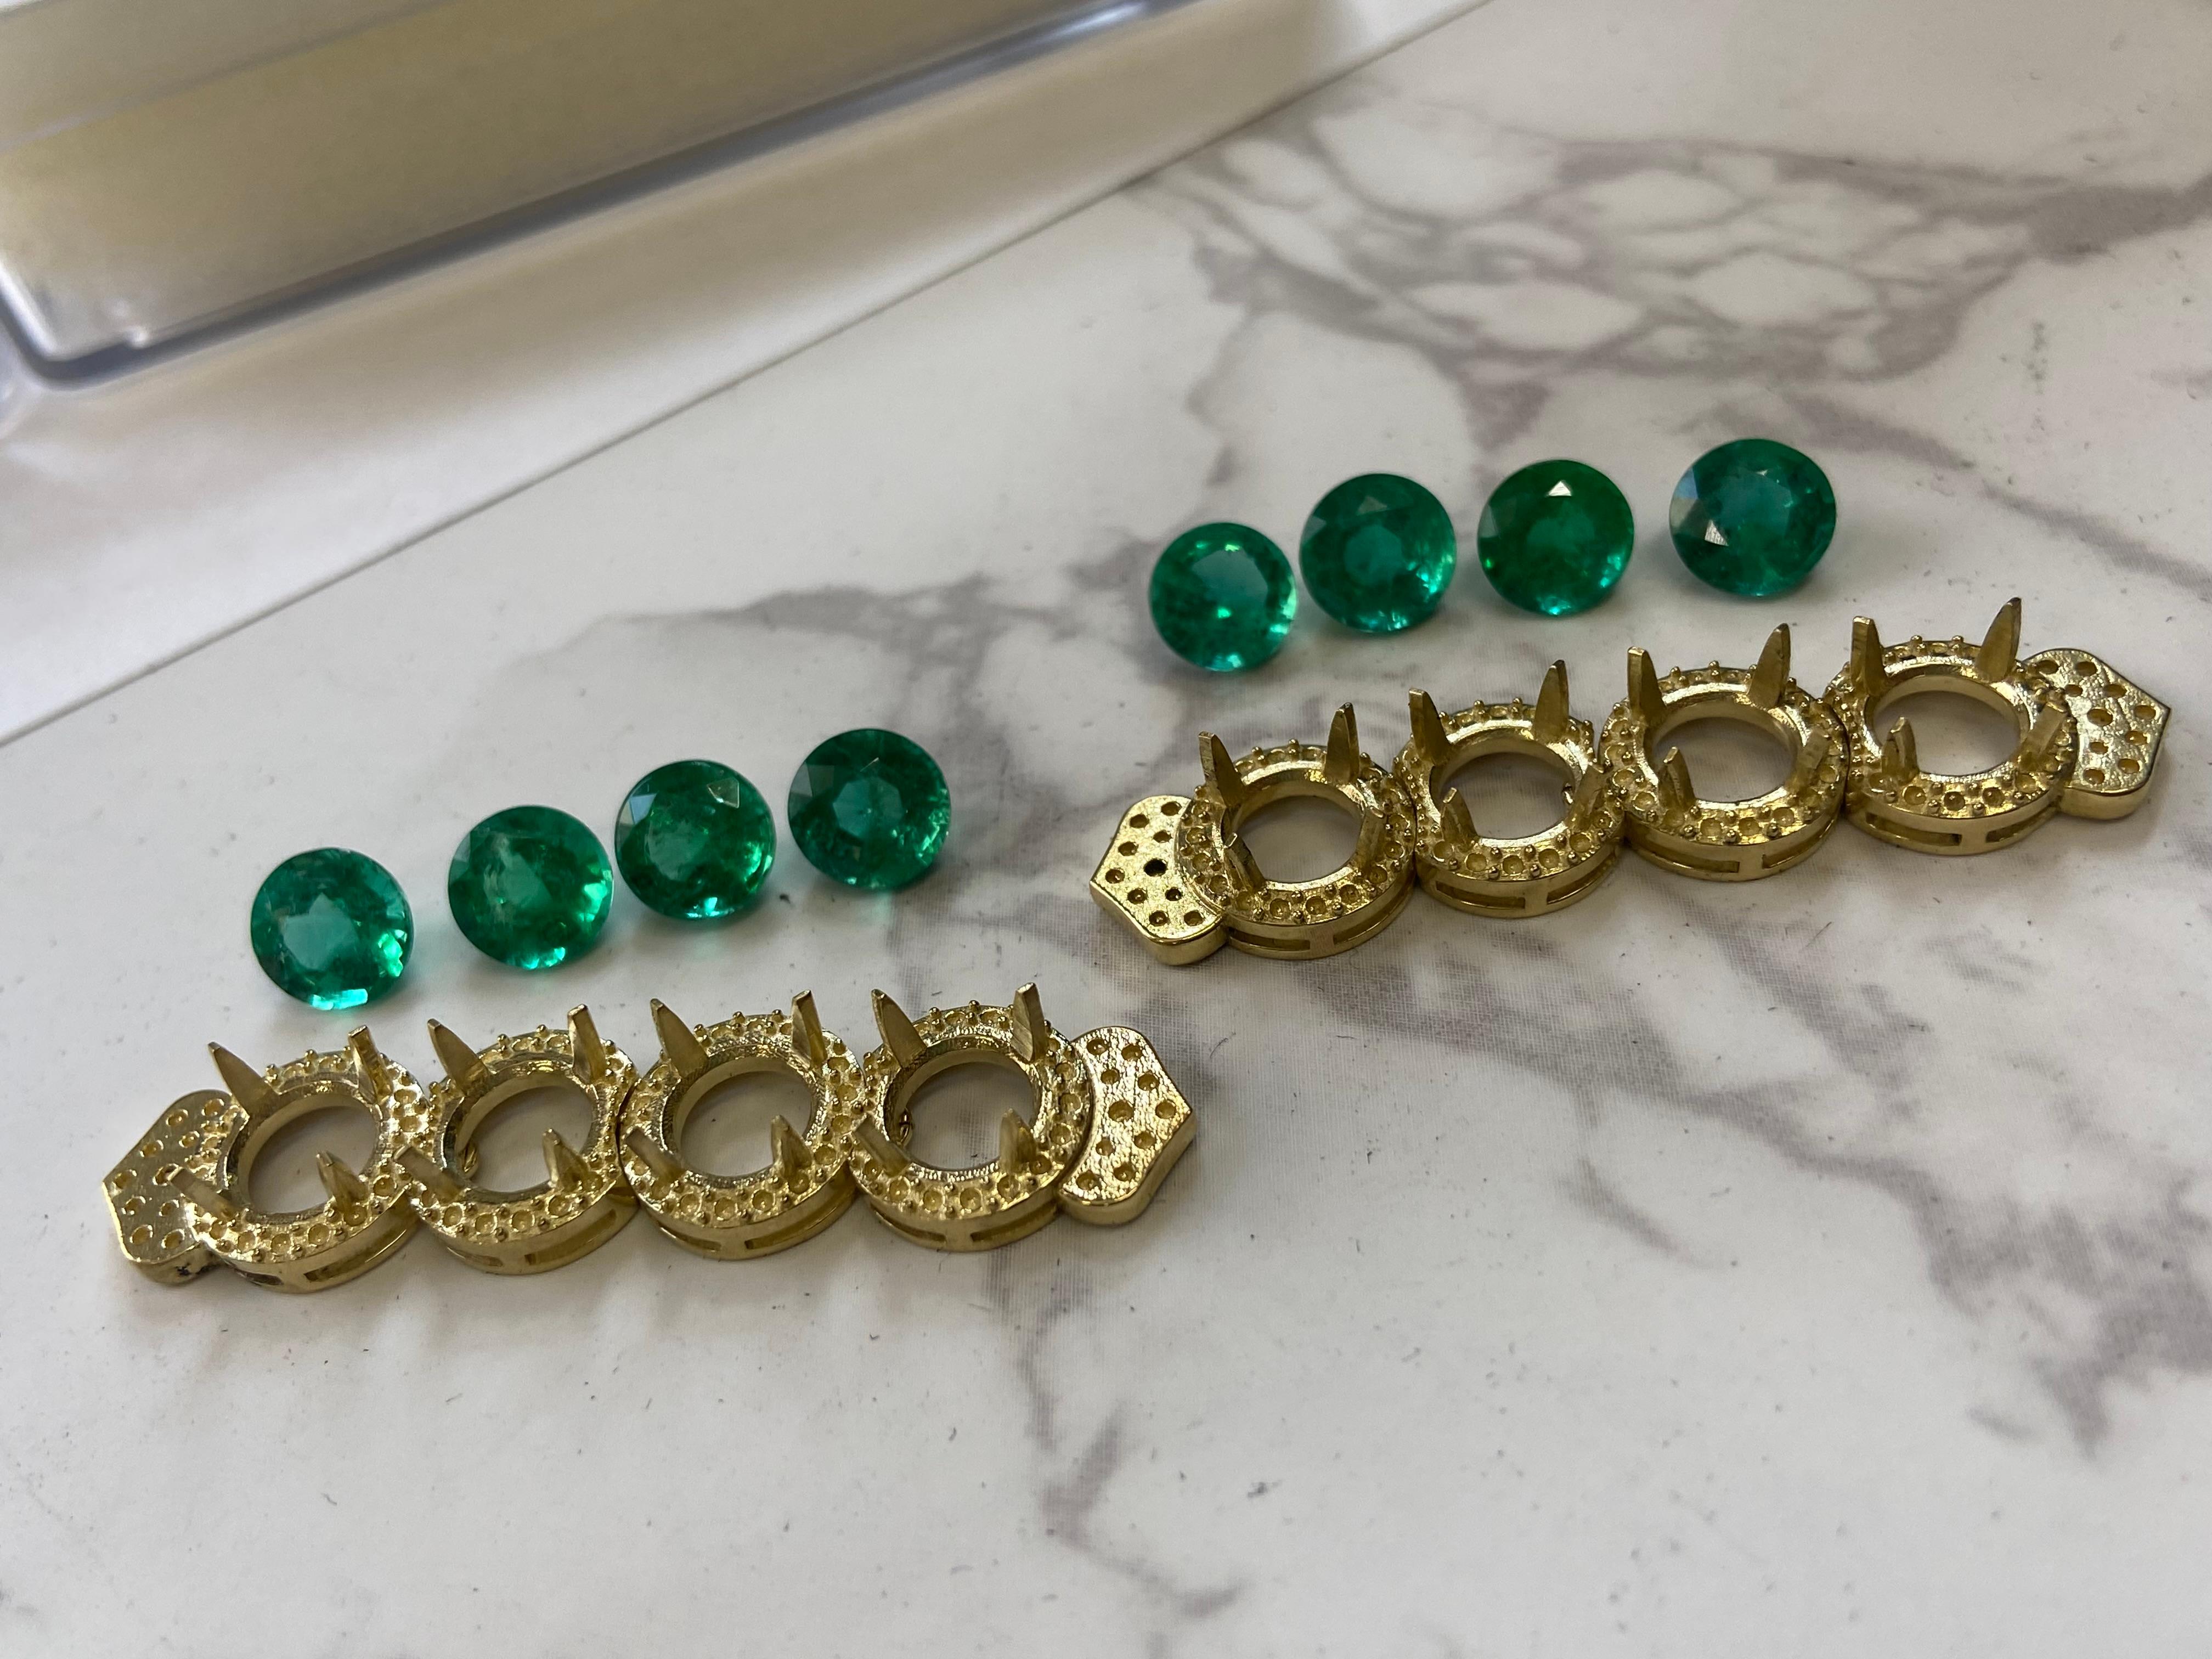 Utterly fascinating 18K yellow gold earrings, featuring 10.88 carats of Zambian Emeralds, sprinkled with 1.42 carats of white diamonds. 